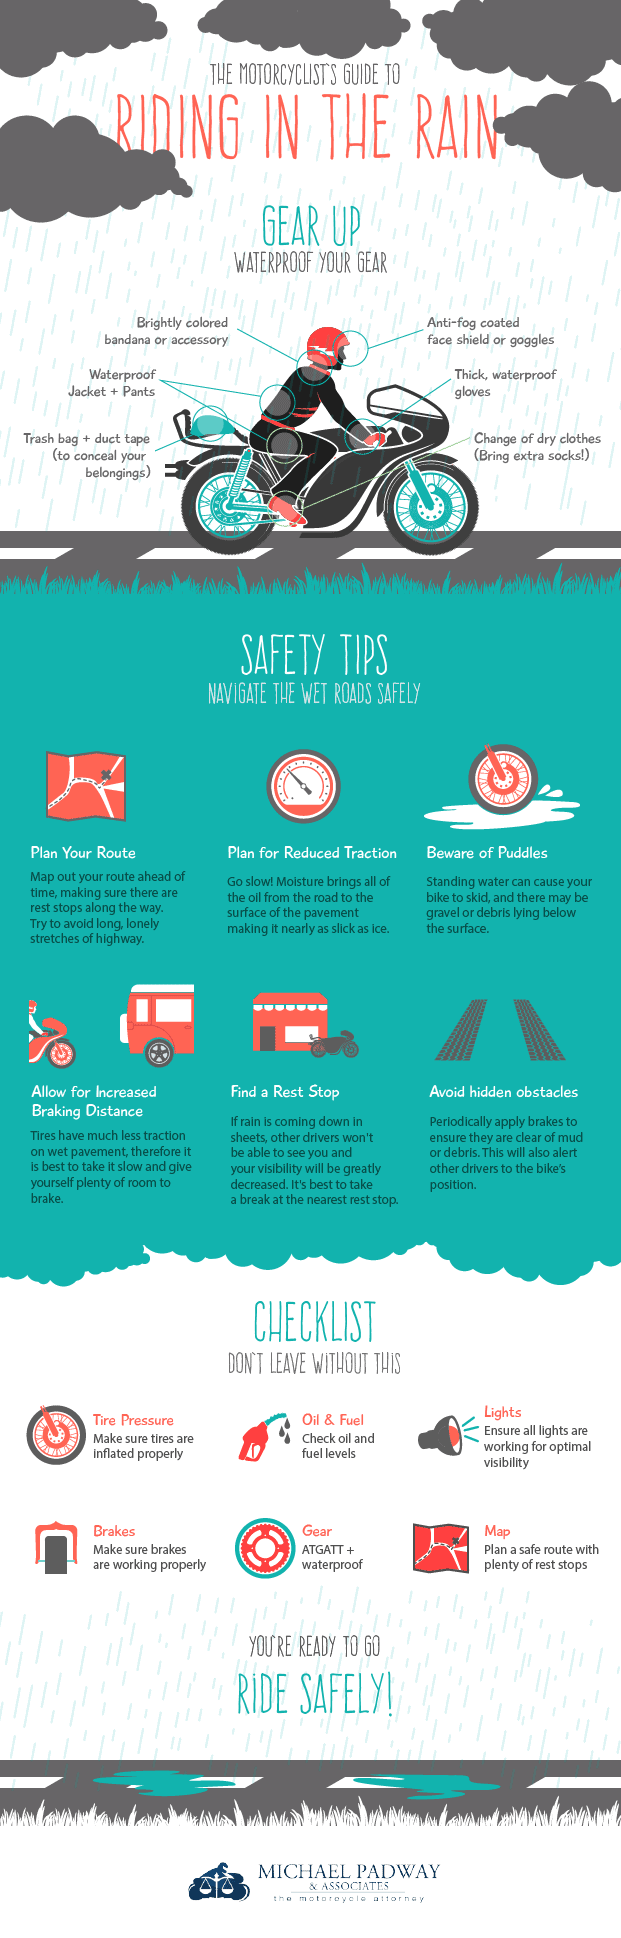 An infographic with tips for riding your motorcycle safely in the rain.